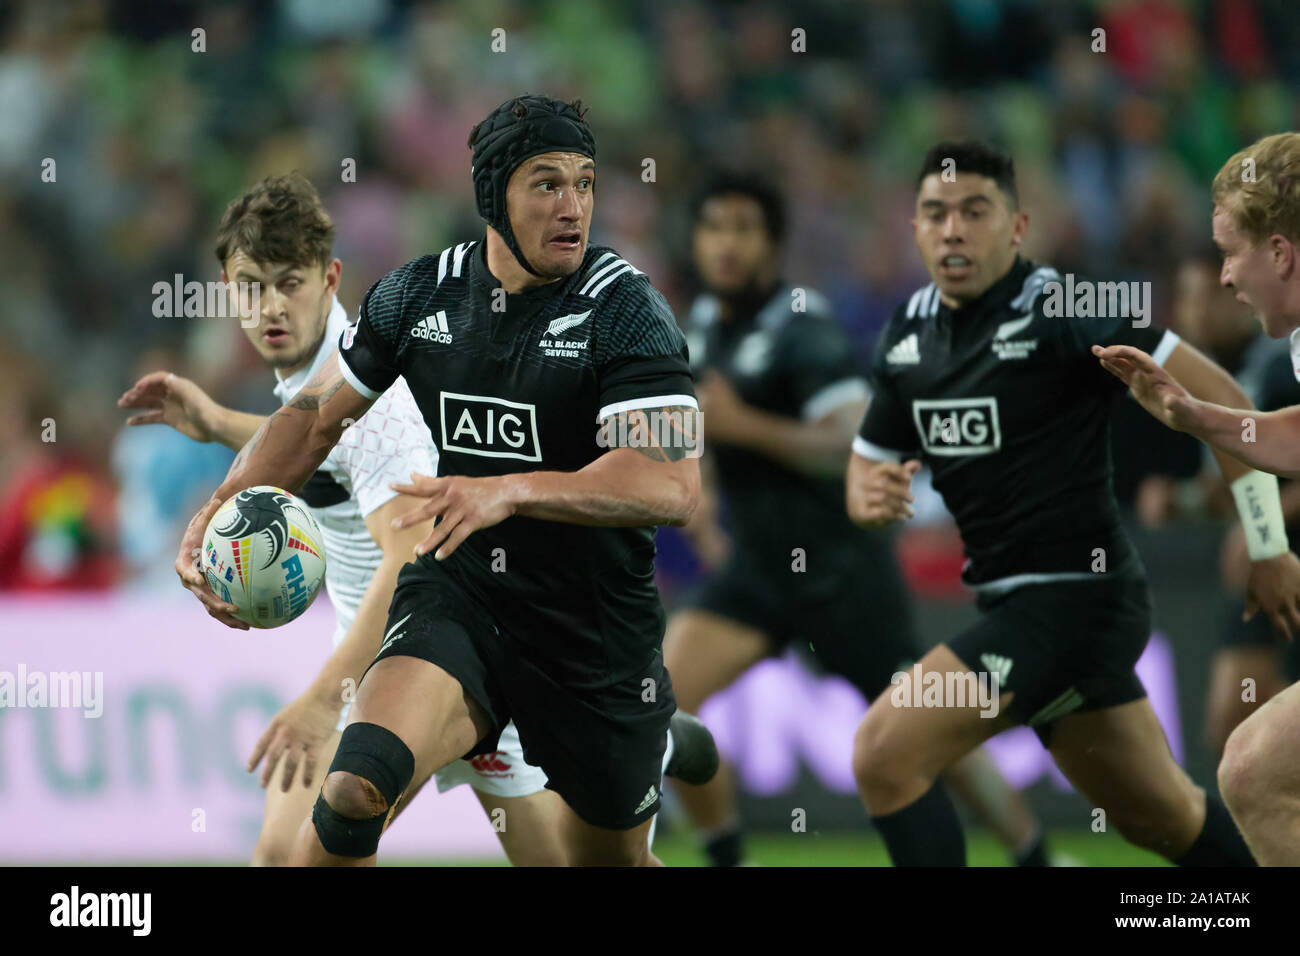 Munich, Germany. 21st Sep, 2019. Oktoberfest Sevens Rugby Tournament in Munich on 21 and 22 September 2019. Group match between New Zealand and England. Trael Joass (New Zealand, 1) is looking for a player to play with under pressure. Credit: Jürgen Kessler/dpa/Alamy Live News Stock Photo